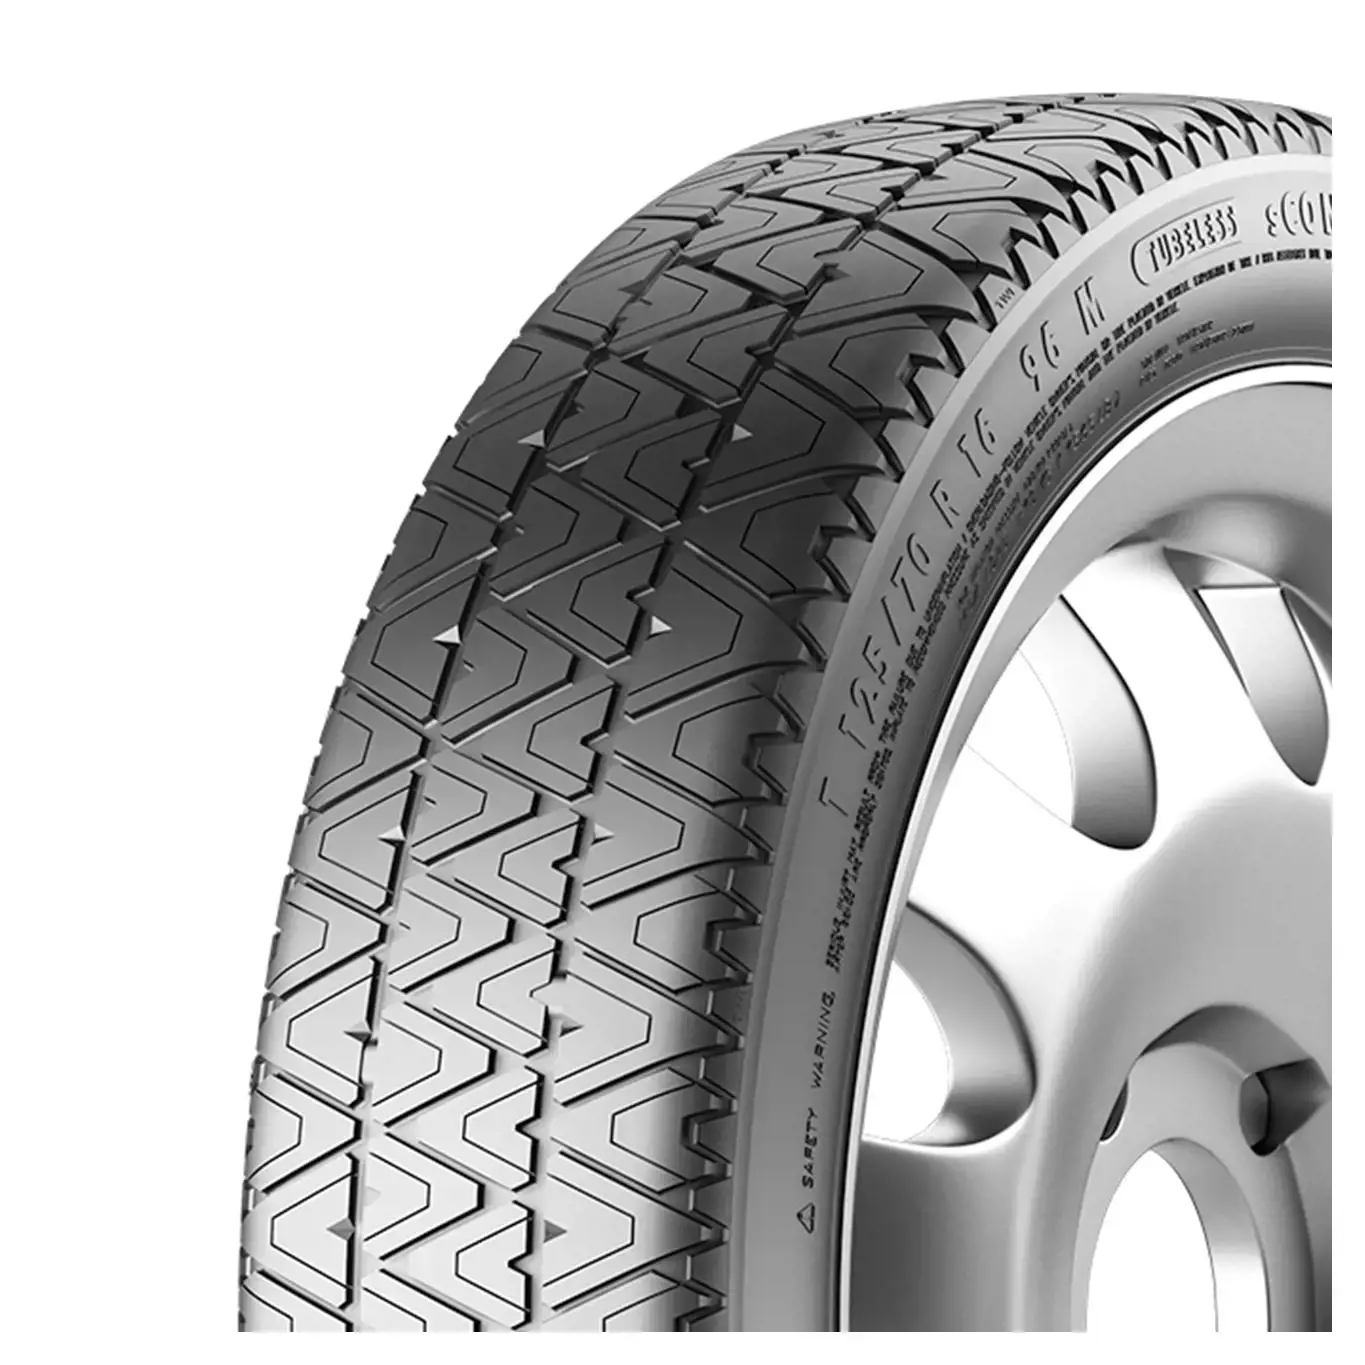 T125/90 R16 98M sContact